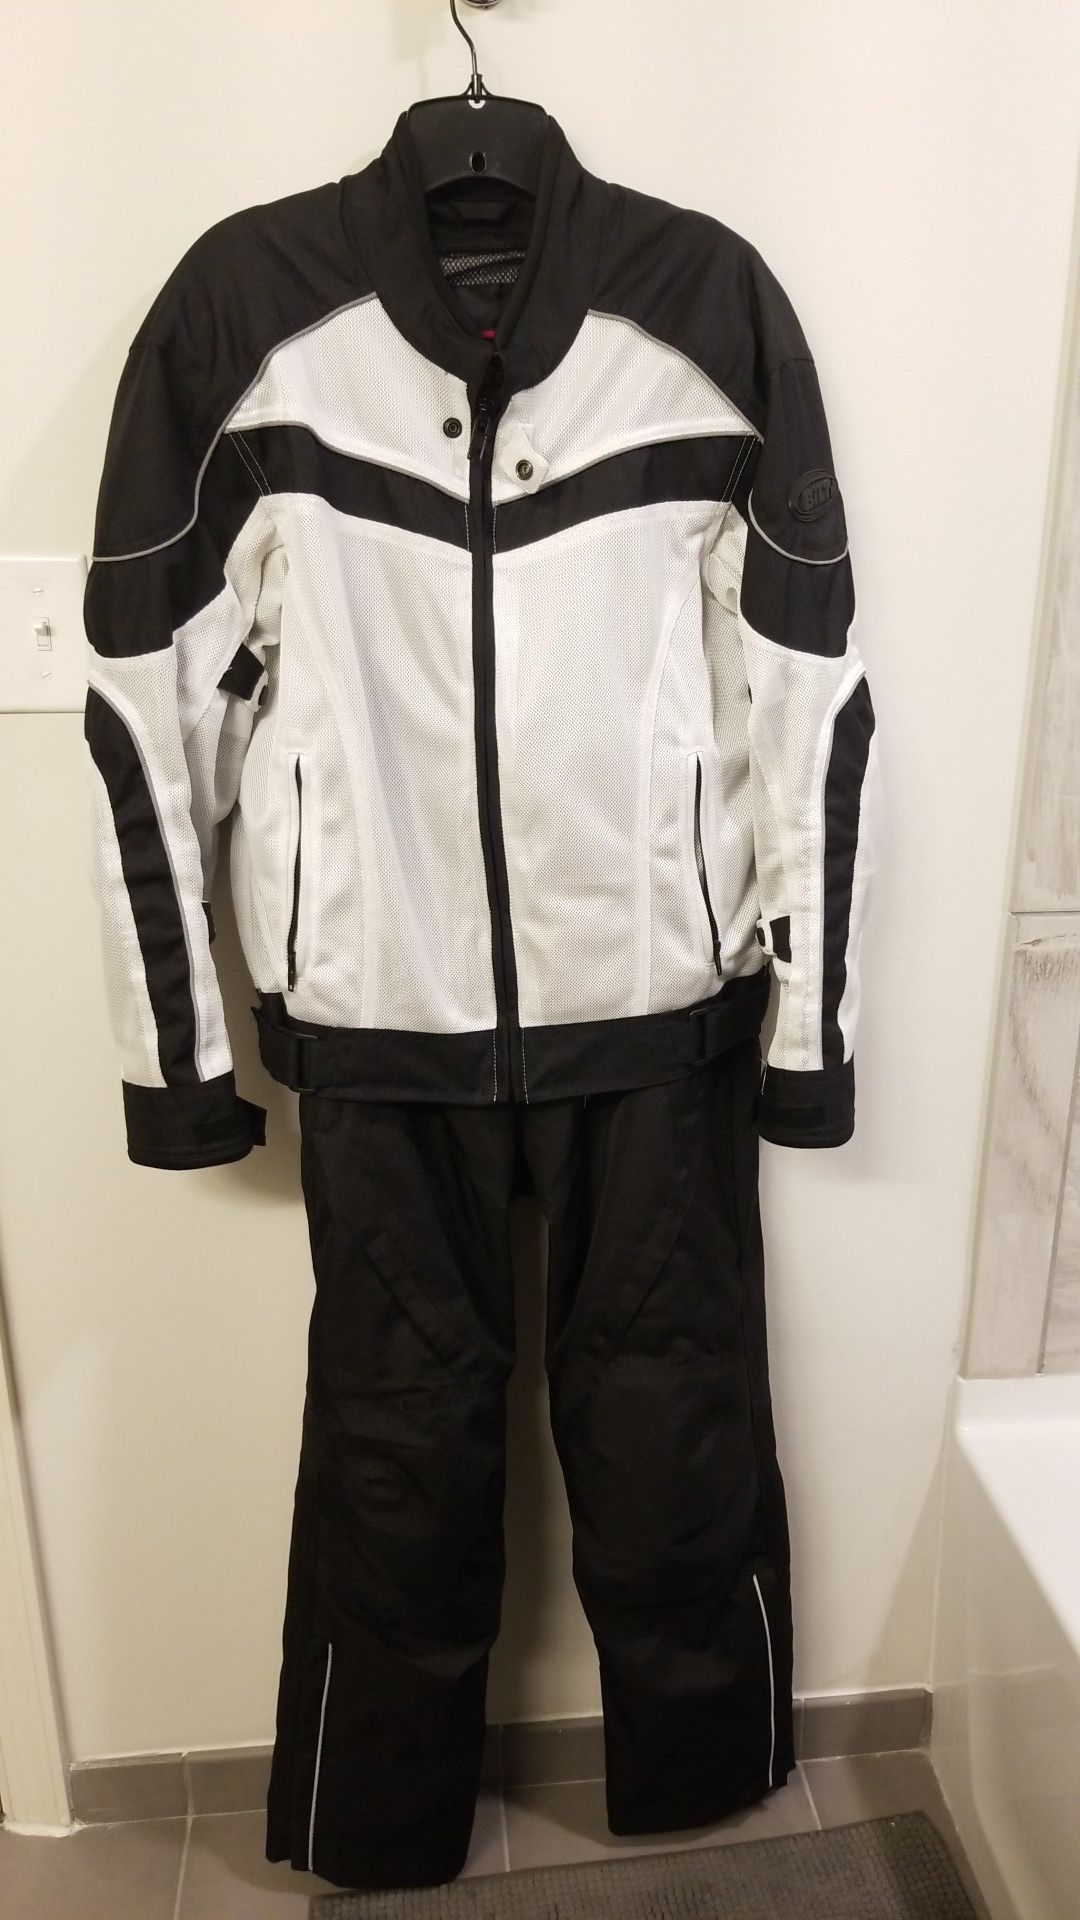 Motorcycle jacket (Men's S) and pants (size 30-31)